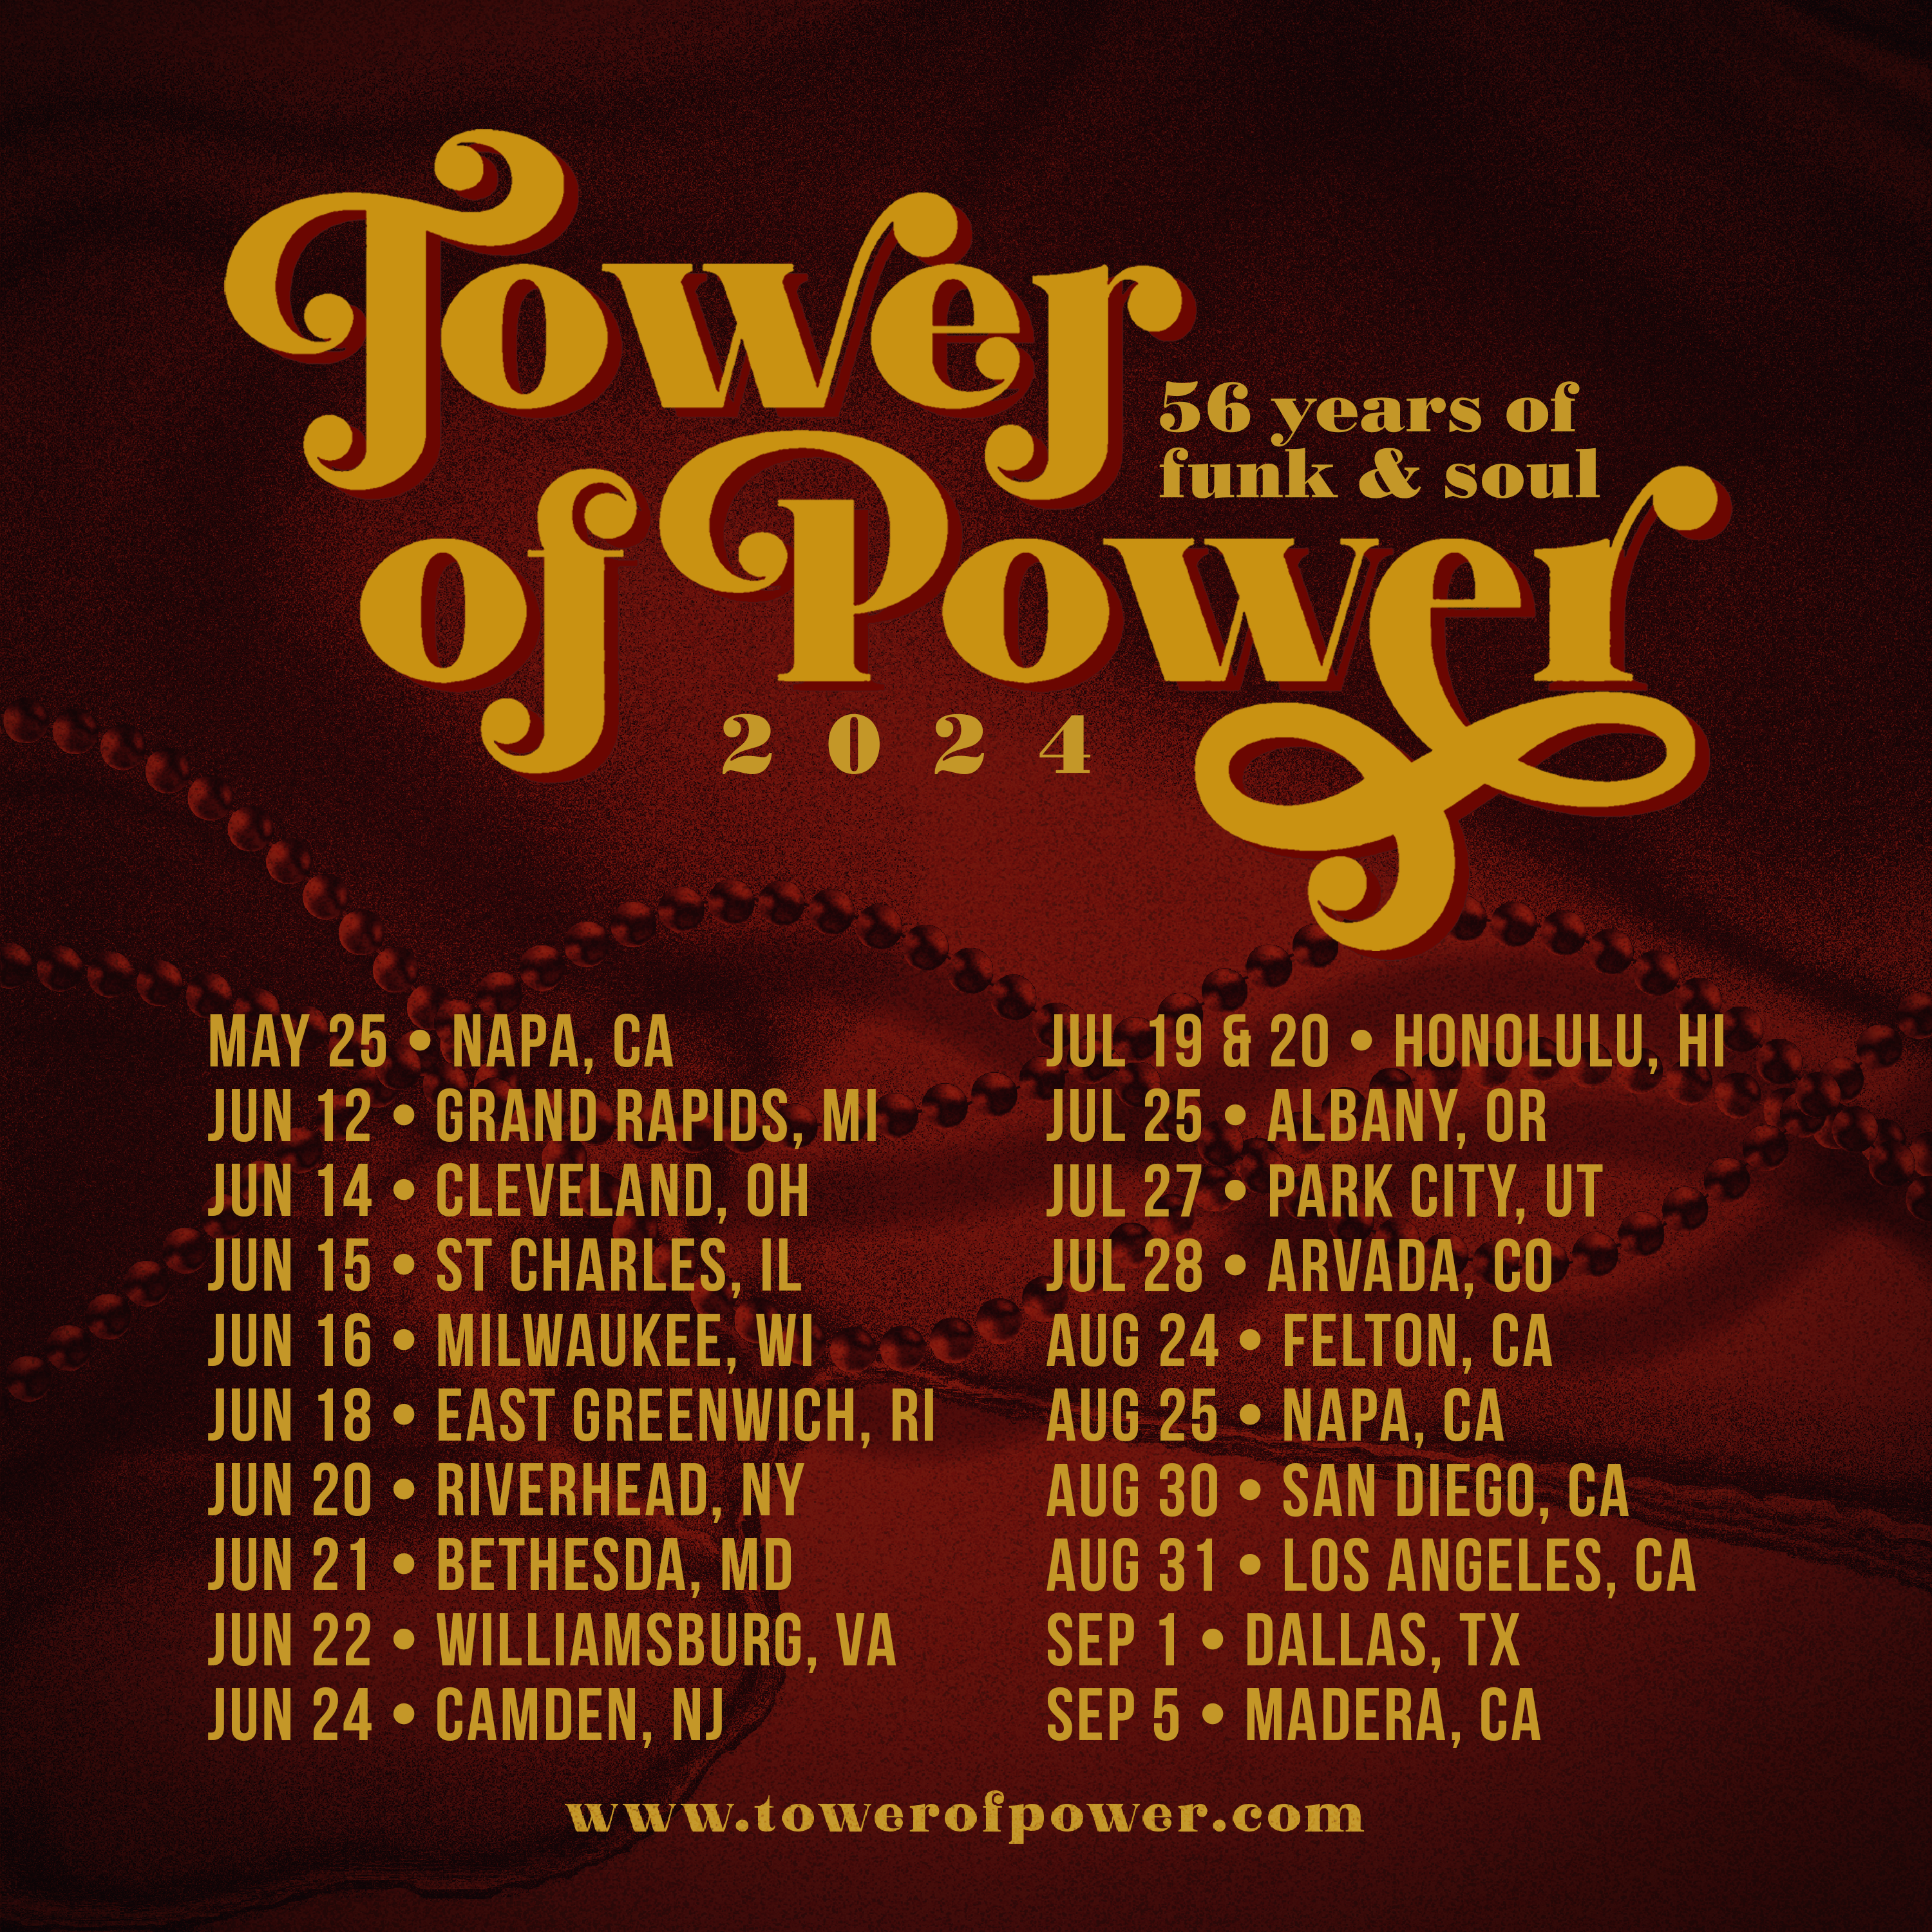 Tower of Power Expands 56th Anniversary Tour to Europe, Announces New Lead Singer